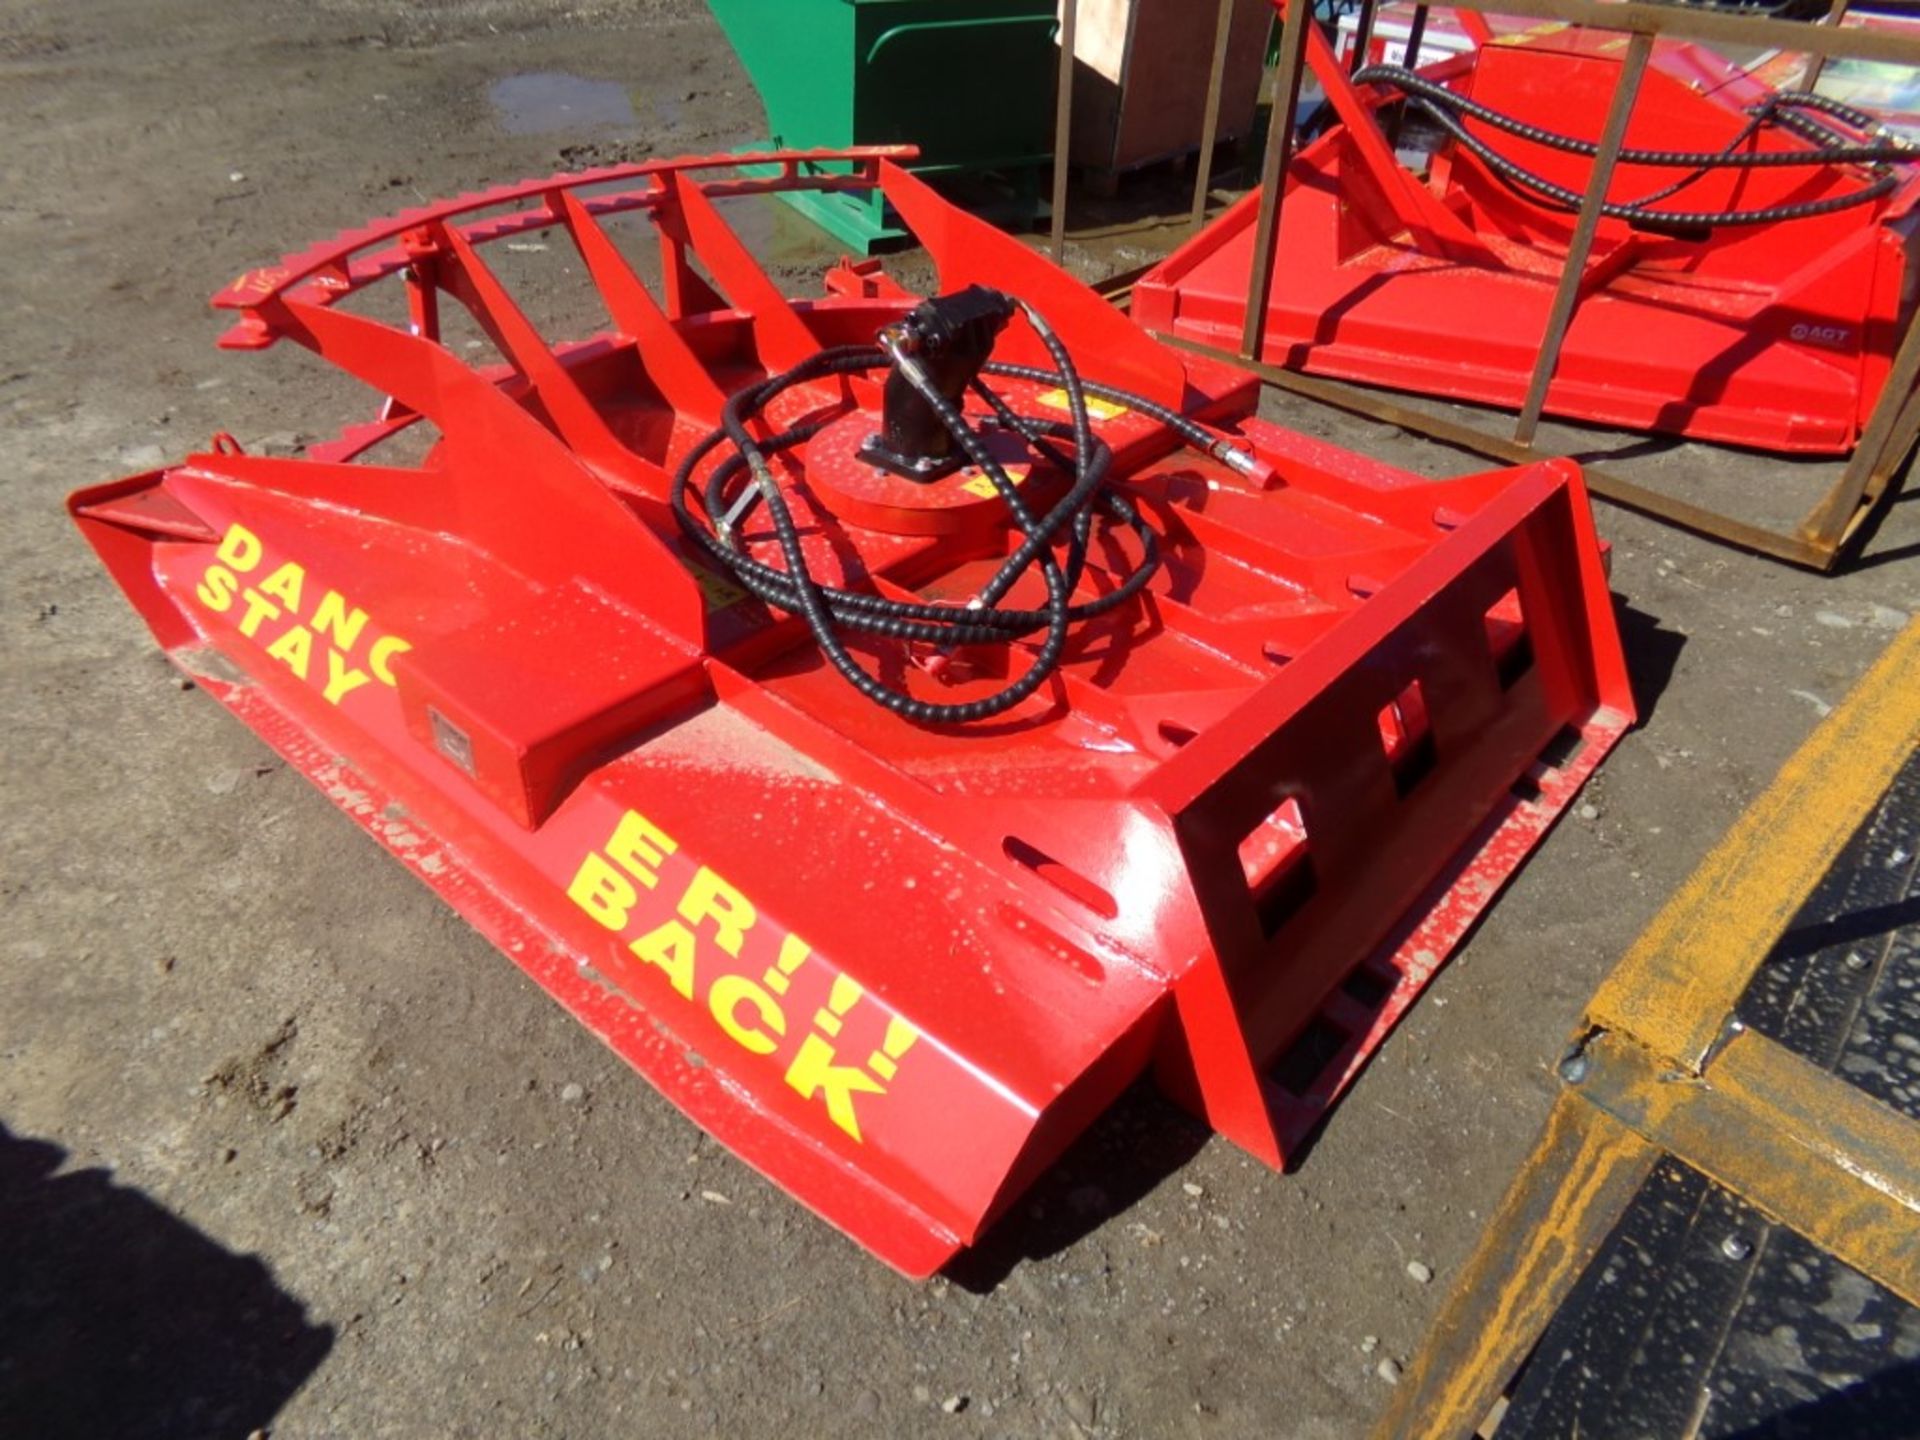 New 6' Hydraulc Brush Cutter for Skid Steer Loader, Red, New Style - Image 2 of 2